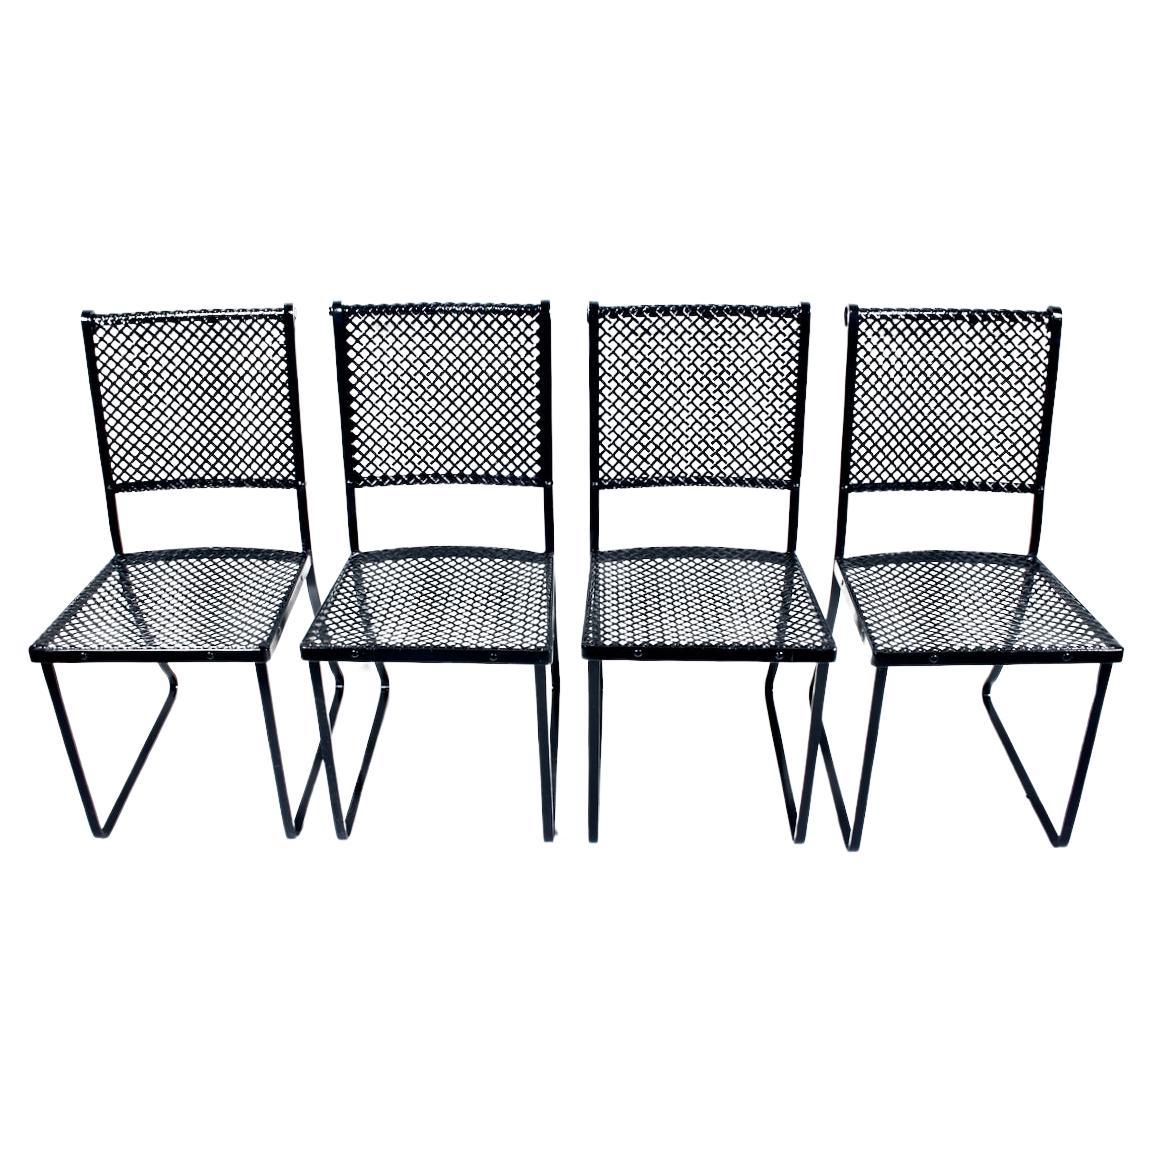 Set of 4 Troy Sunshade Black Enameled Iron "Mesh" Conservatory Chairs, C. 1940 For Sale